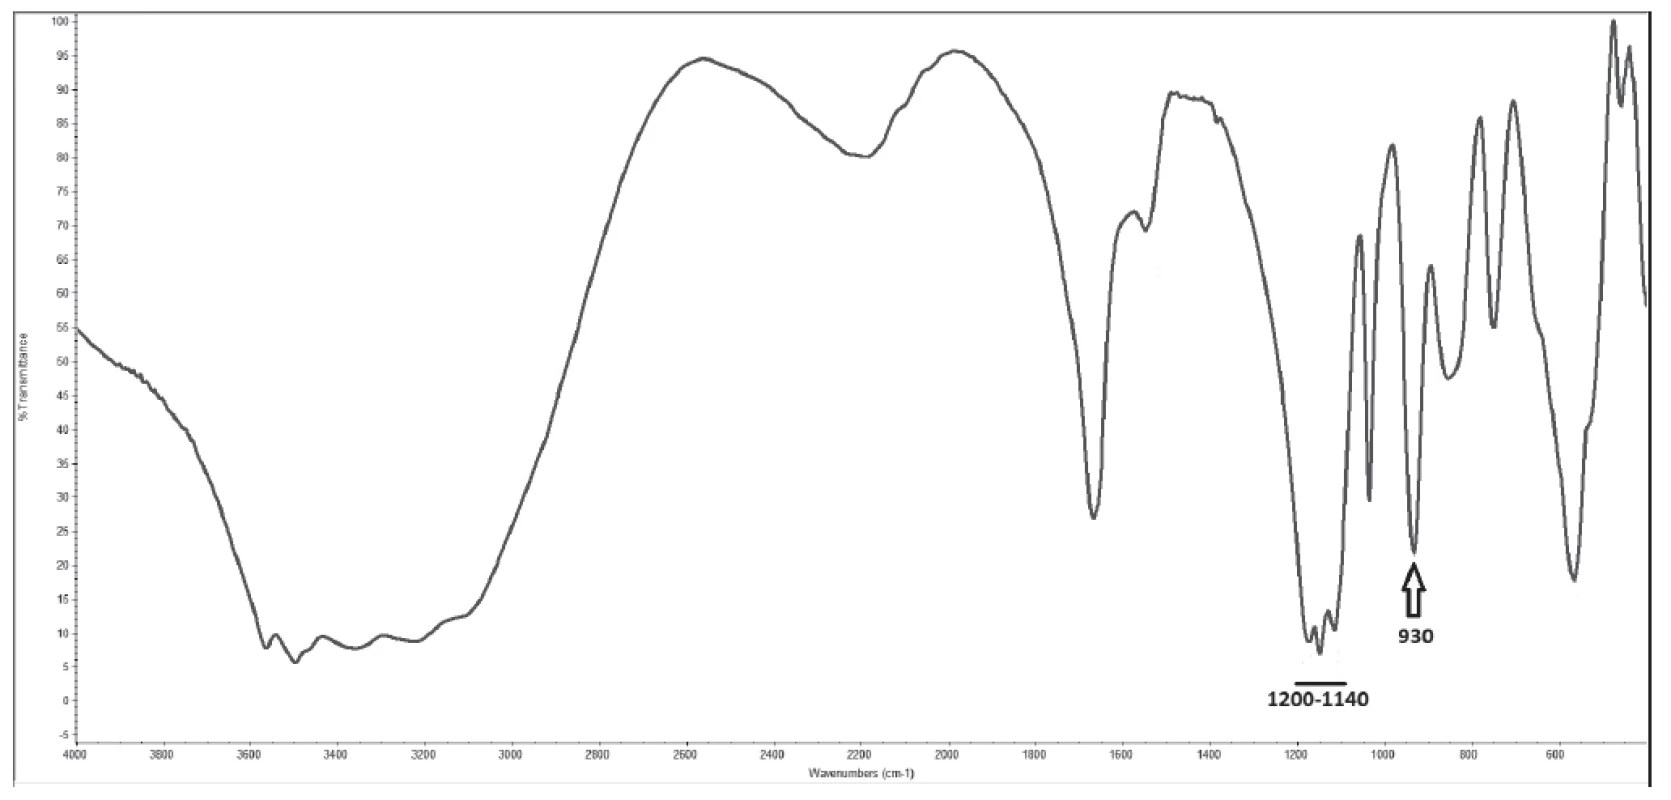 Infra-red spectrometry spectrum of analysed renal
stone with specific peak for pyrophosphate (930 cm-1) and
specific region for sulphates (1200 - 1140 cm-1)